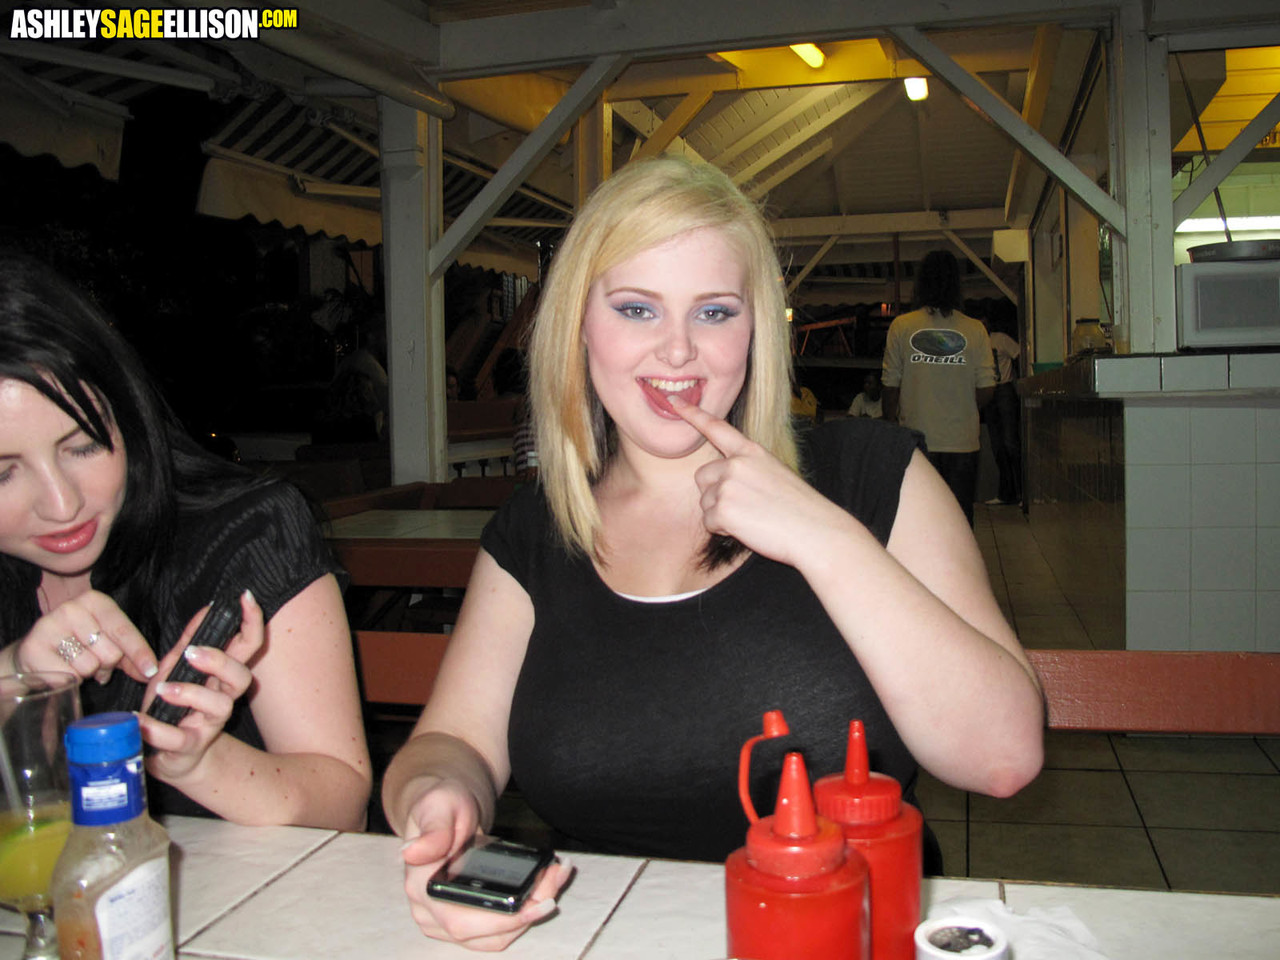 Fat chick Ashley Sage Ellison and her busty gf go out on the town porn photo #426376435 | Ashley Sage Ellison Pics, Ashley Sage Ellison, Karina Hart, BBW, mobile porn